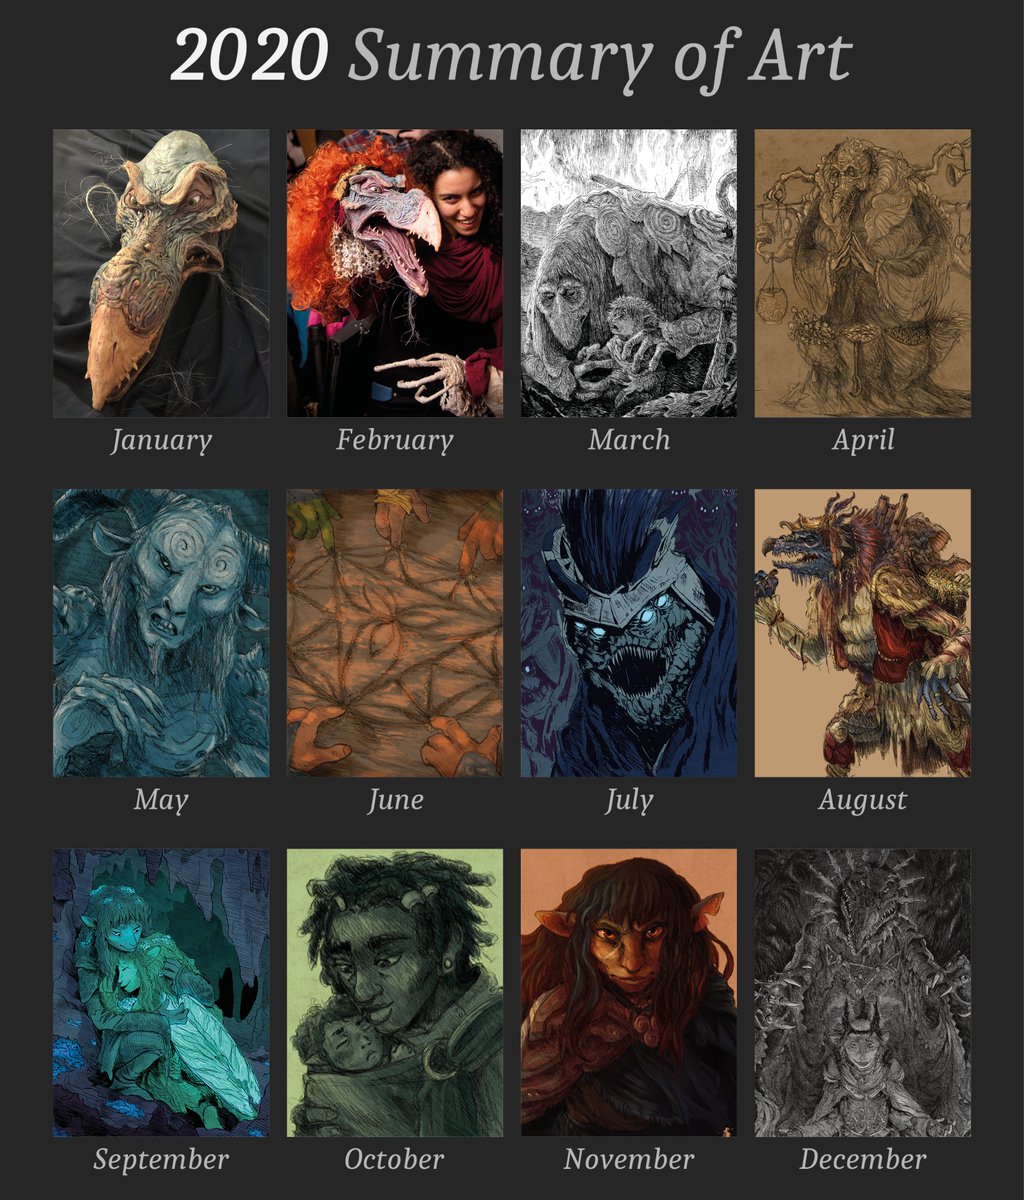 My twitter was a bit abandoned for a long time, so those who only follows me here have never seen most of them. But don't worry, I'll post my best 2020 art ! #2020artsummary #2020ArtistWrapped #2020ART